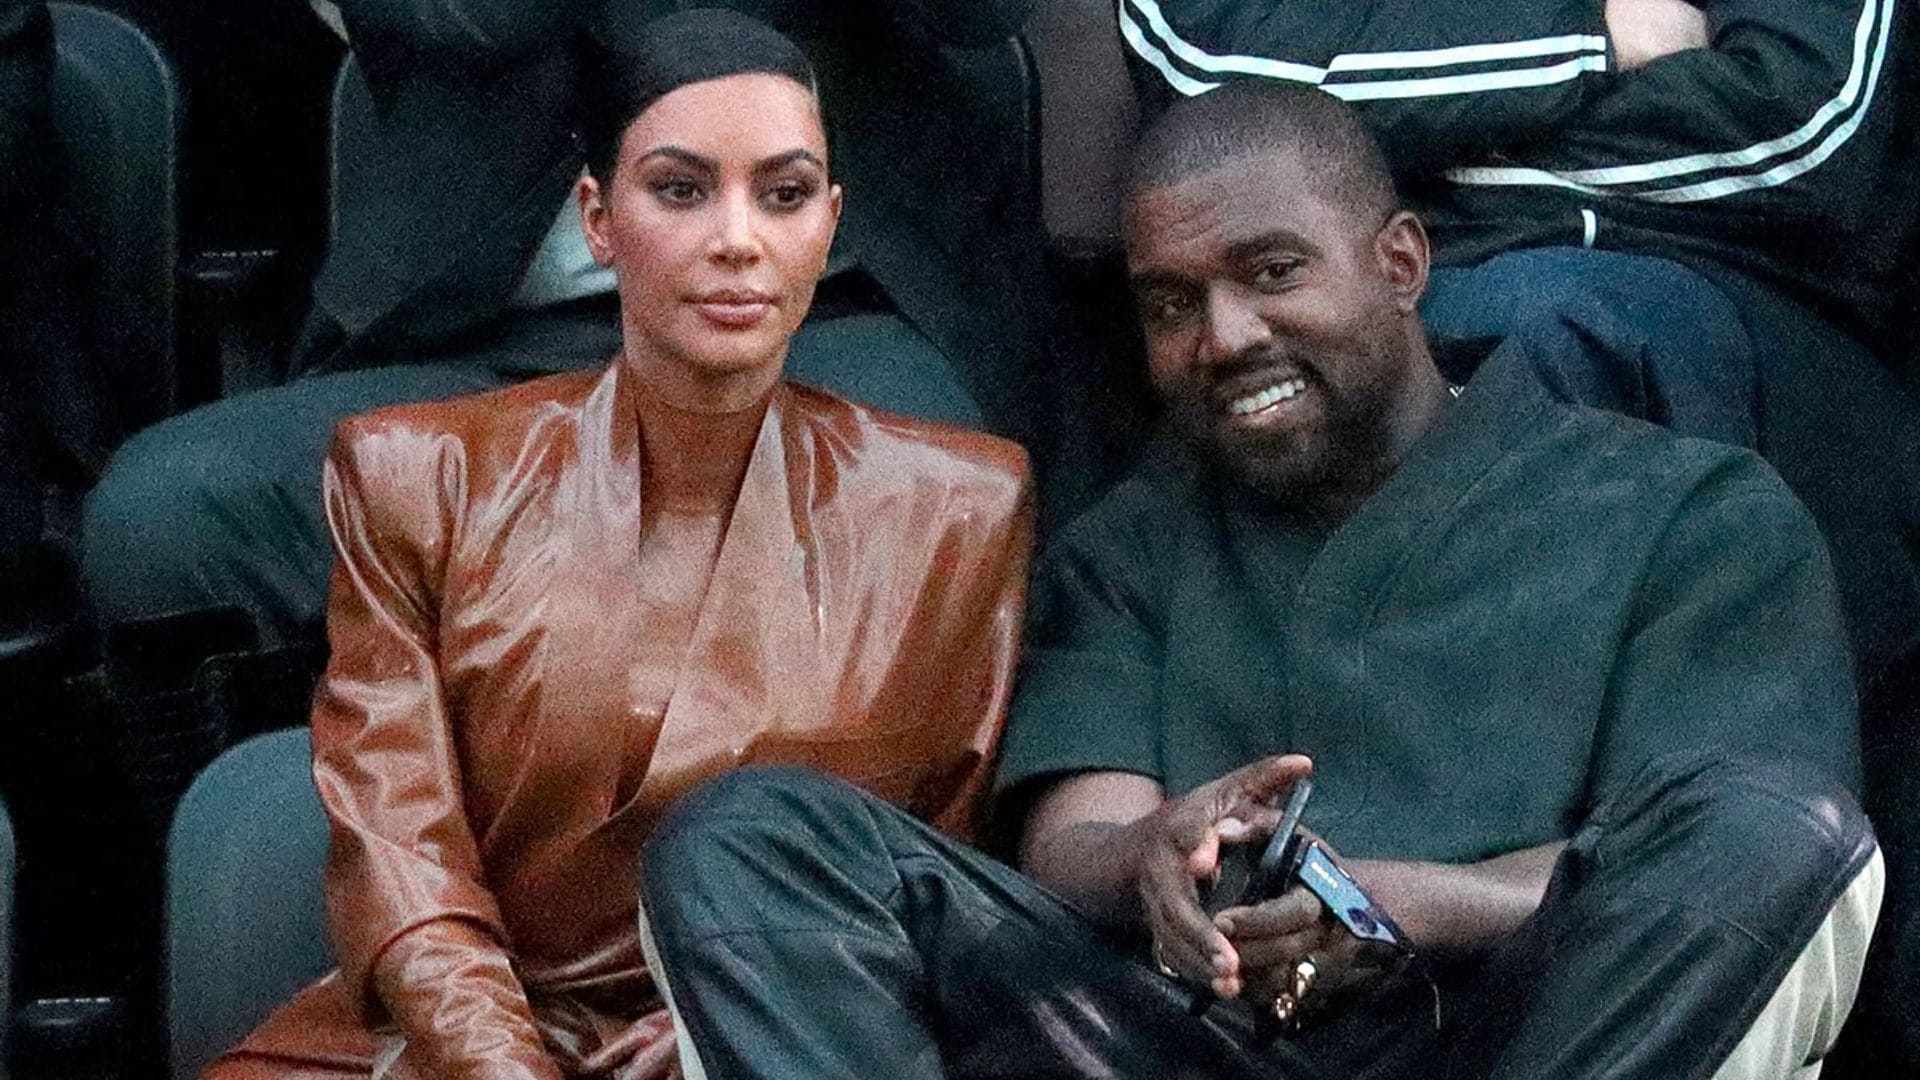 It’s official! Kim Kardashian files for divorce from Kanye West